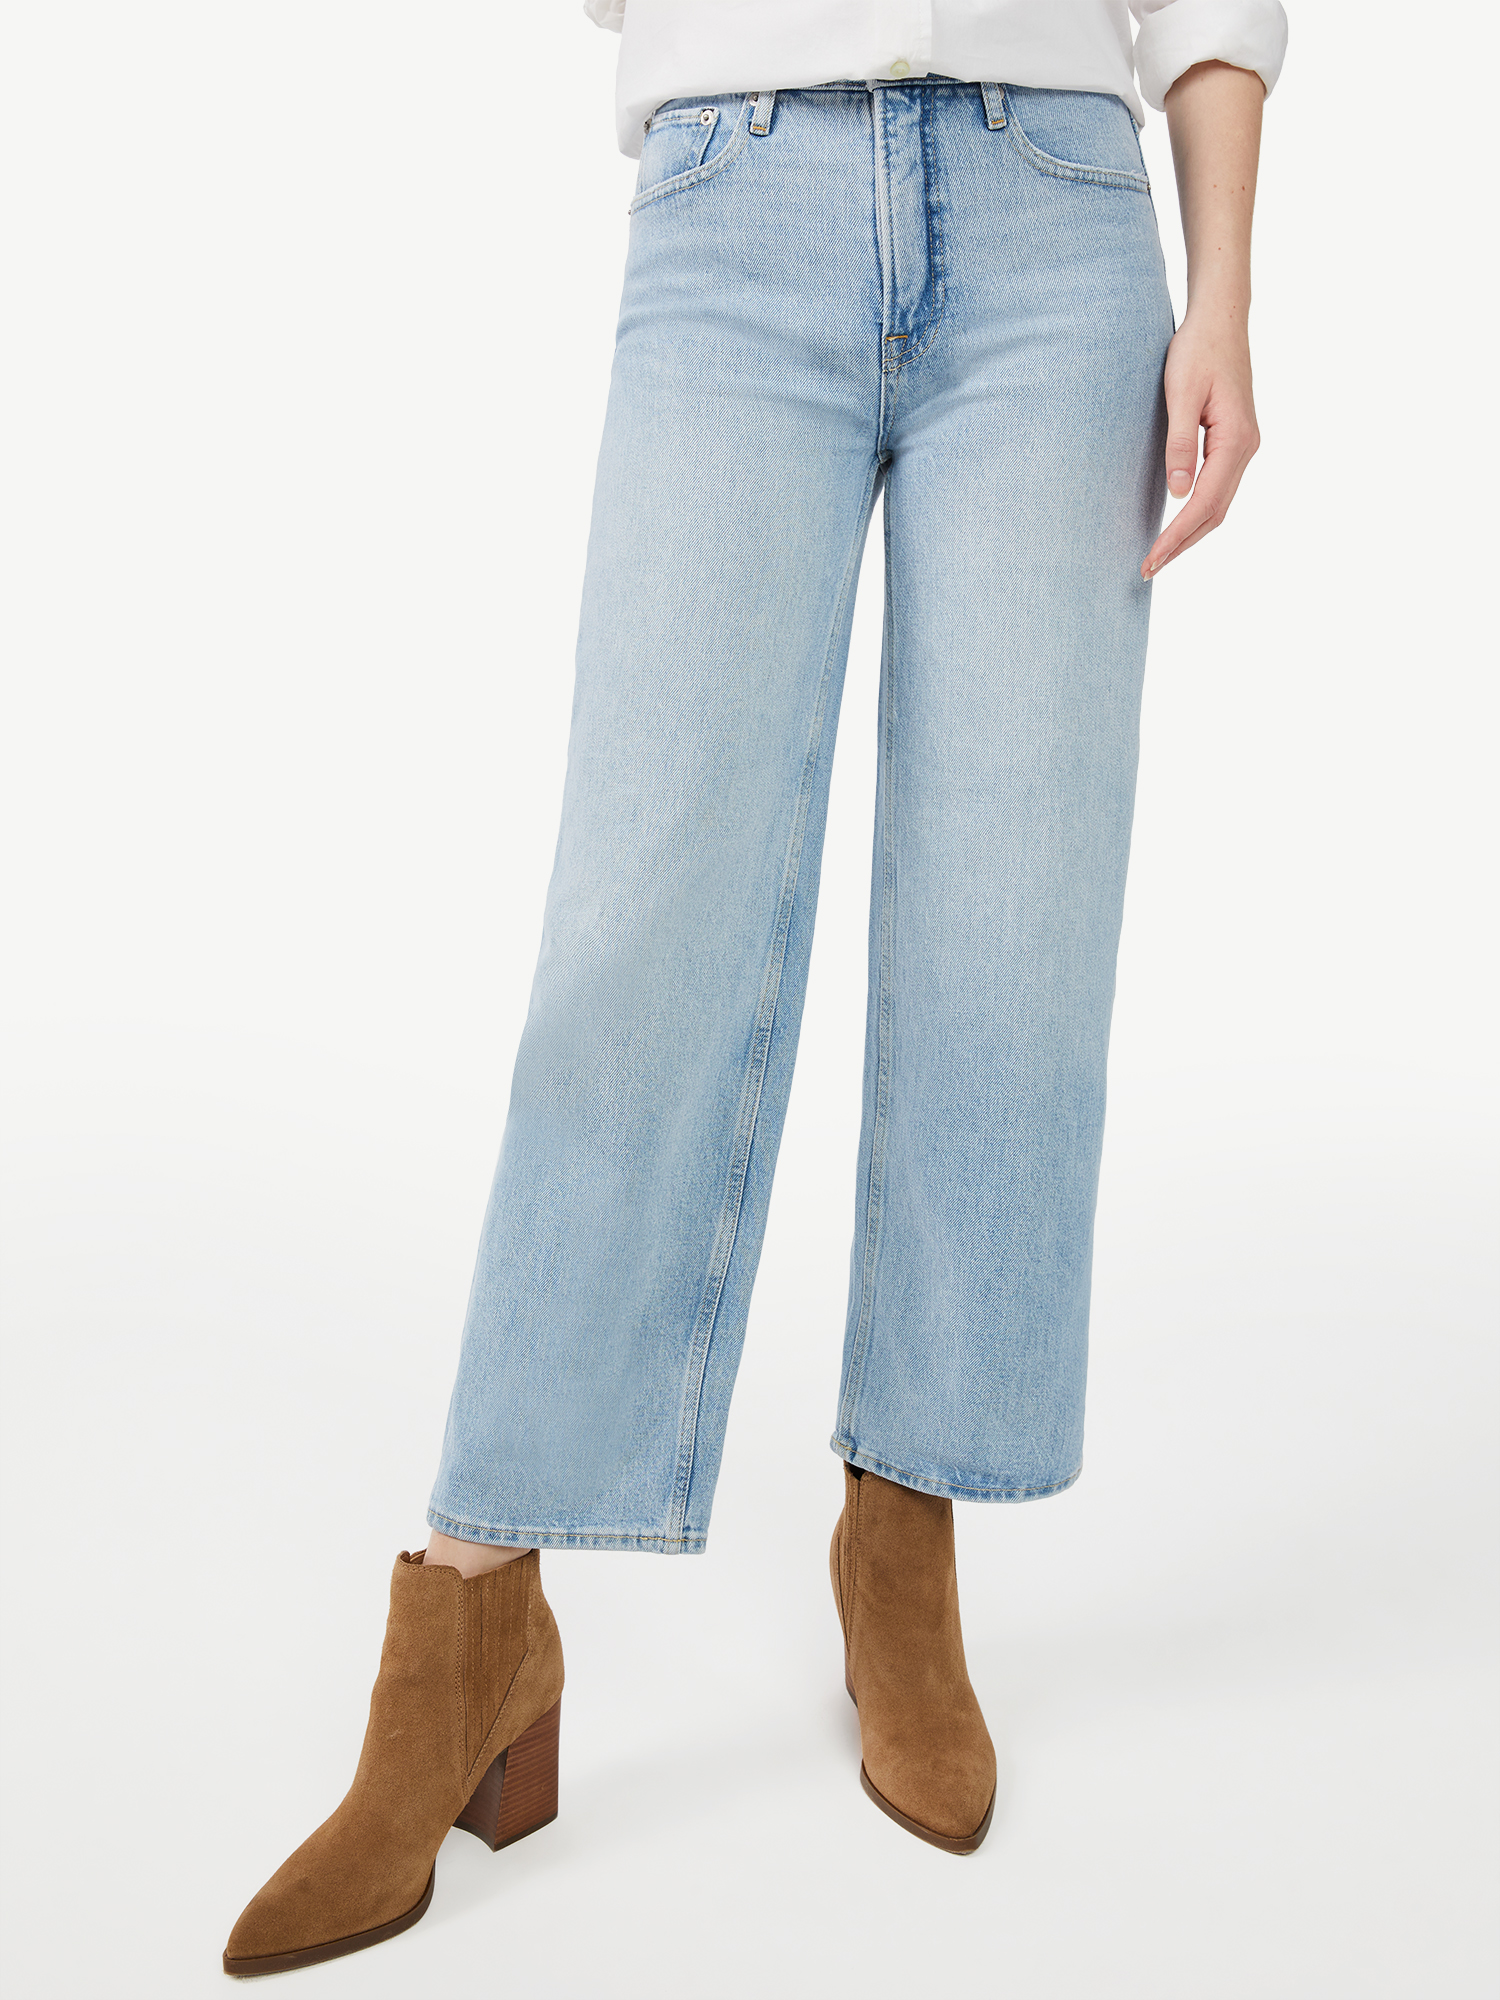 Free Assembly Women's Super High Rise Crop Wide Straight Jean - image 1 of 6